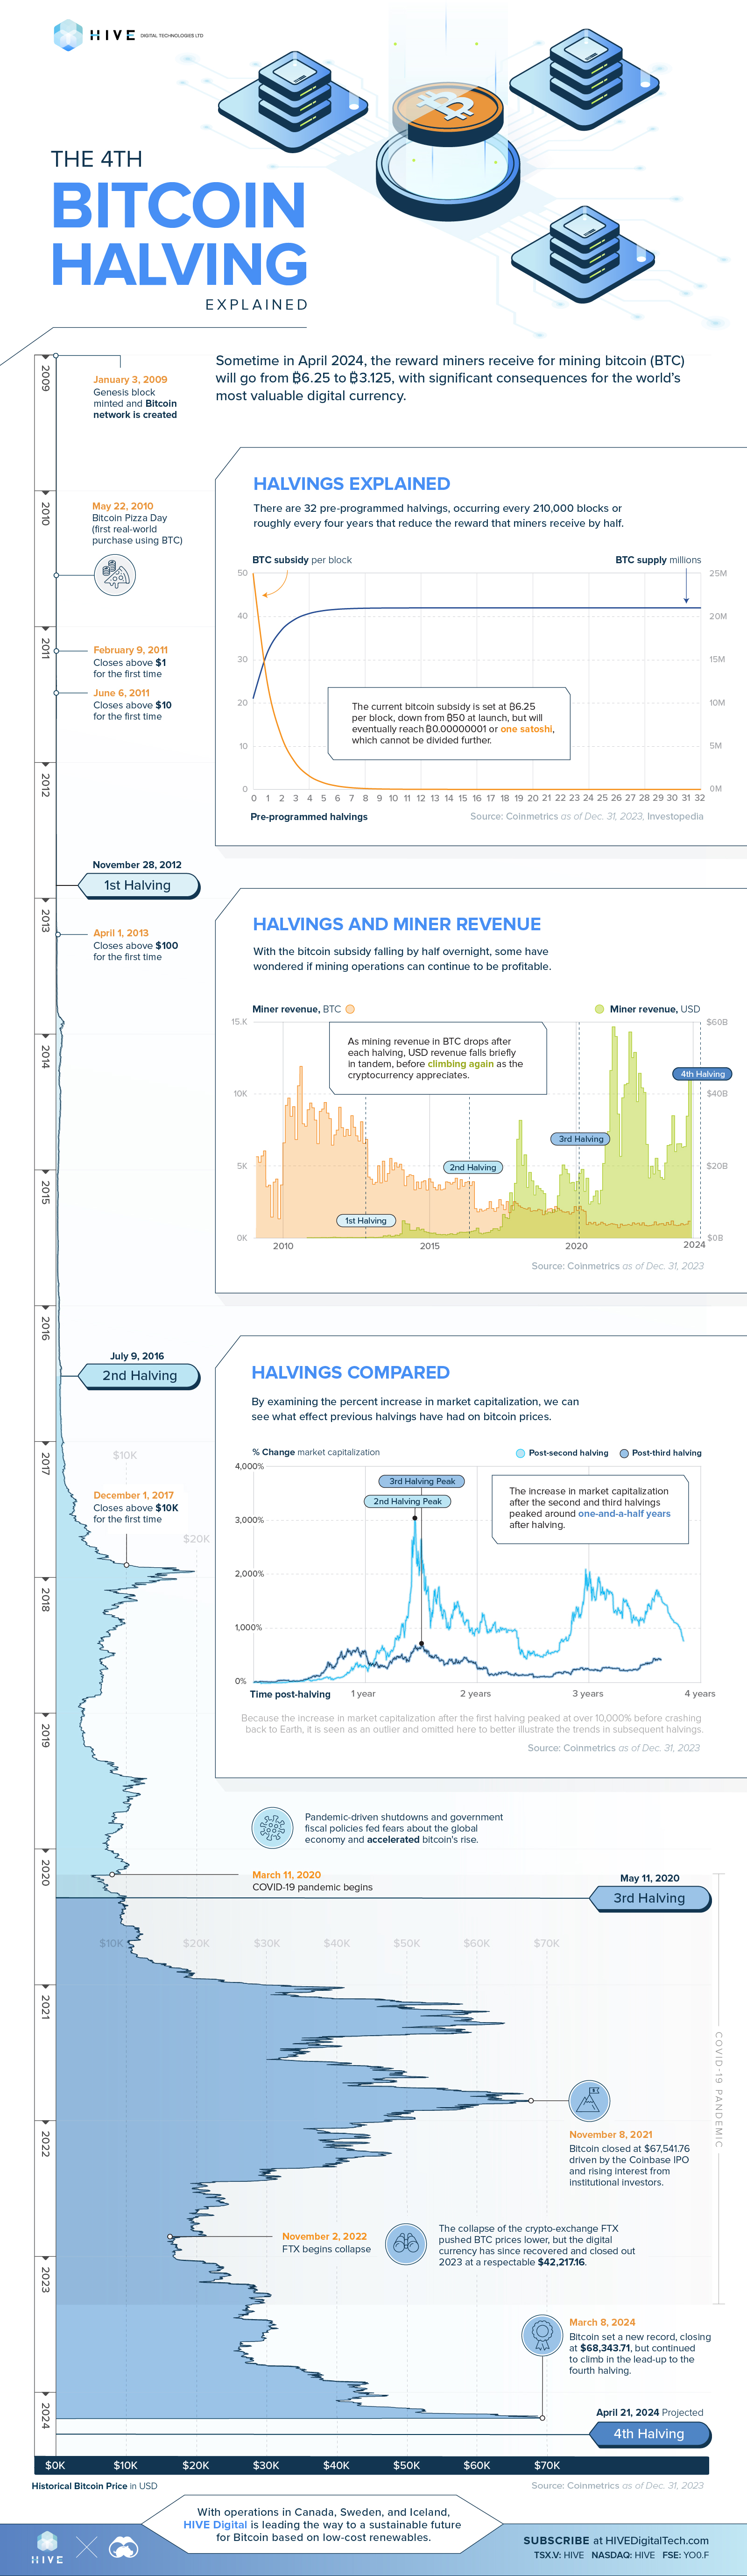 Area graph showing the historical price of Bitcoin in USD, and three line graphs comparing previous halvings, explaining the upcoming 4th halving.Area graph showing the historical price of Bitcoin in USD, and three line graphs comparing previous halvings, explaining the upcoming 4th halving.